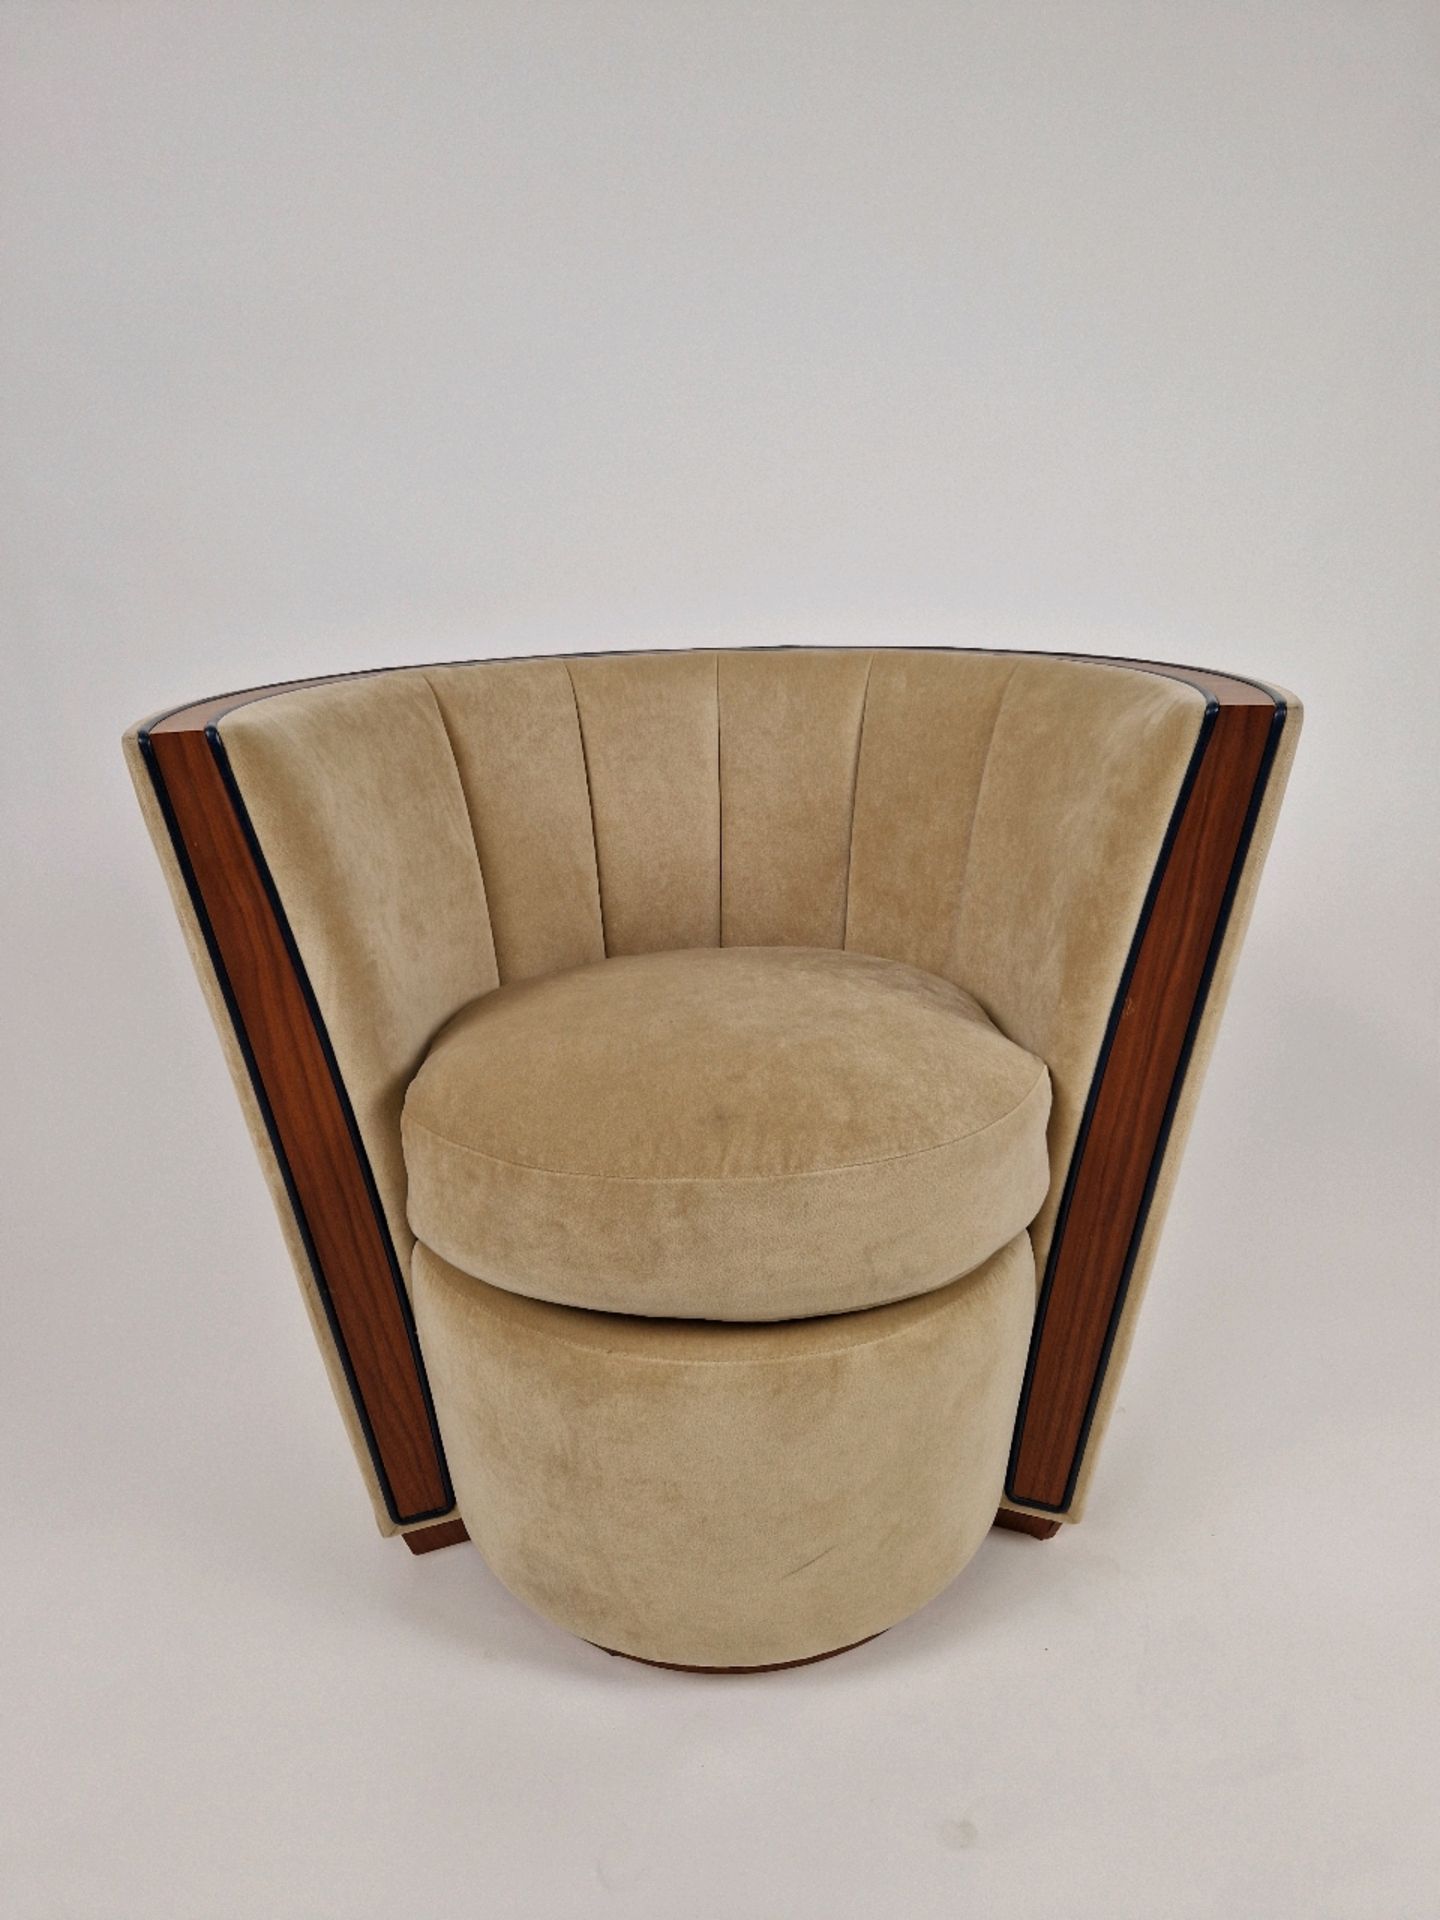 Bespoke Deco Tub Chair Made for Claridge's by David Linley - Image 2 of 9